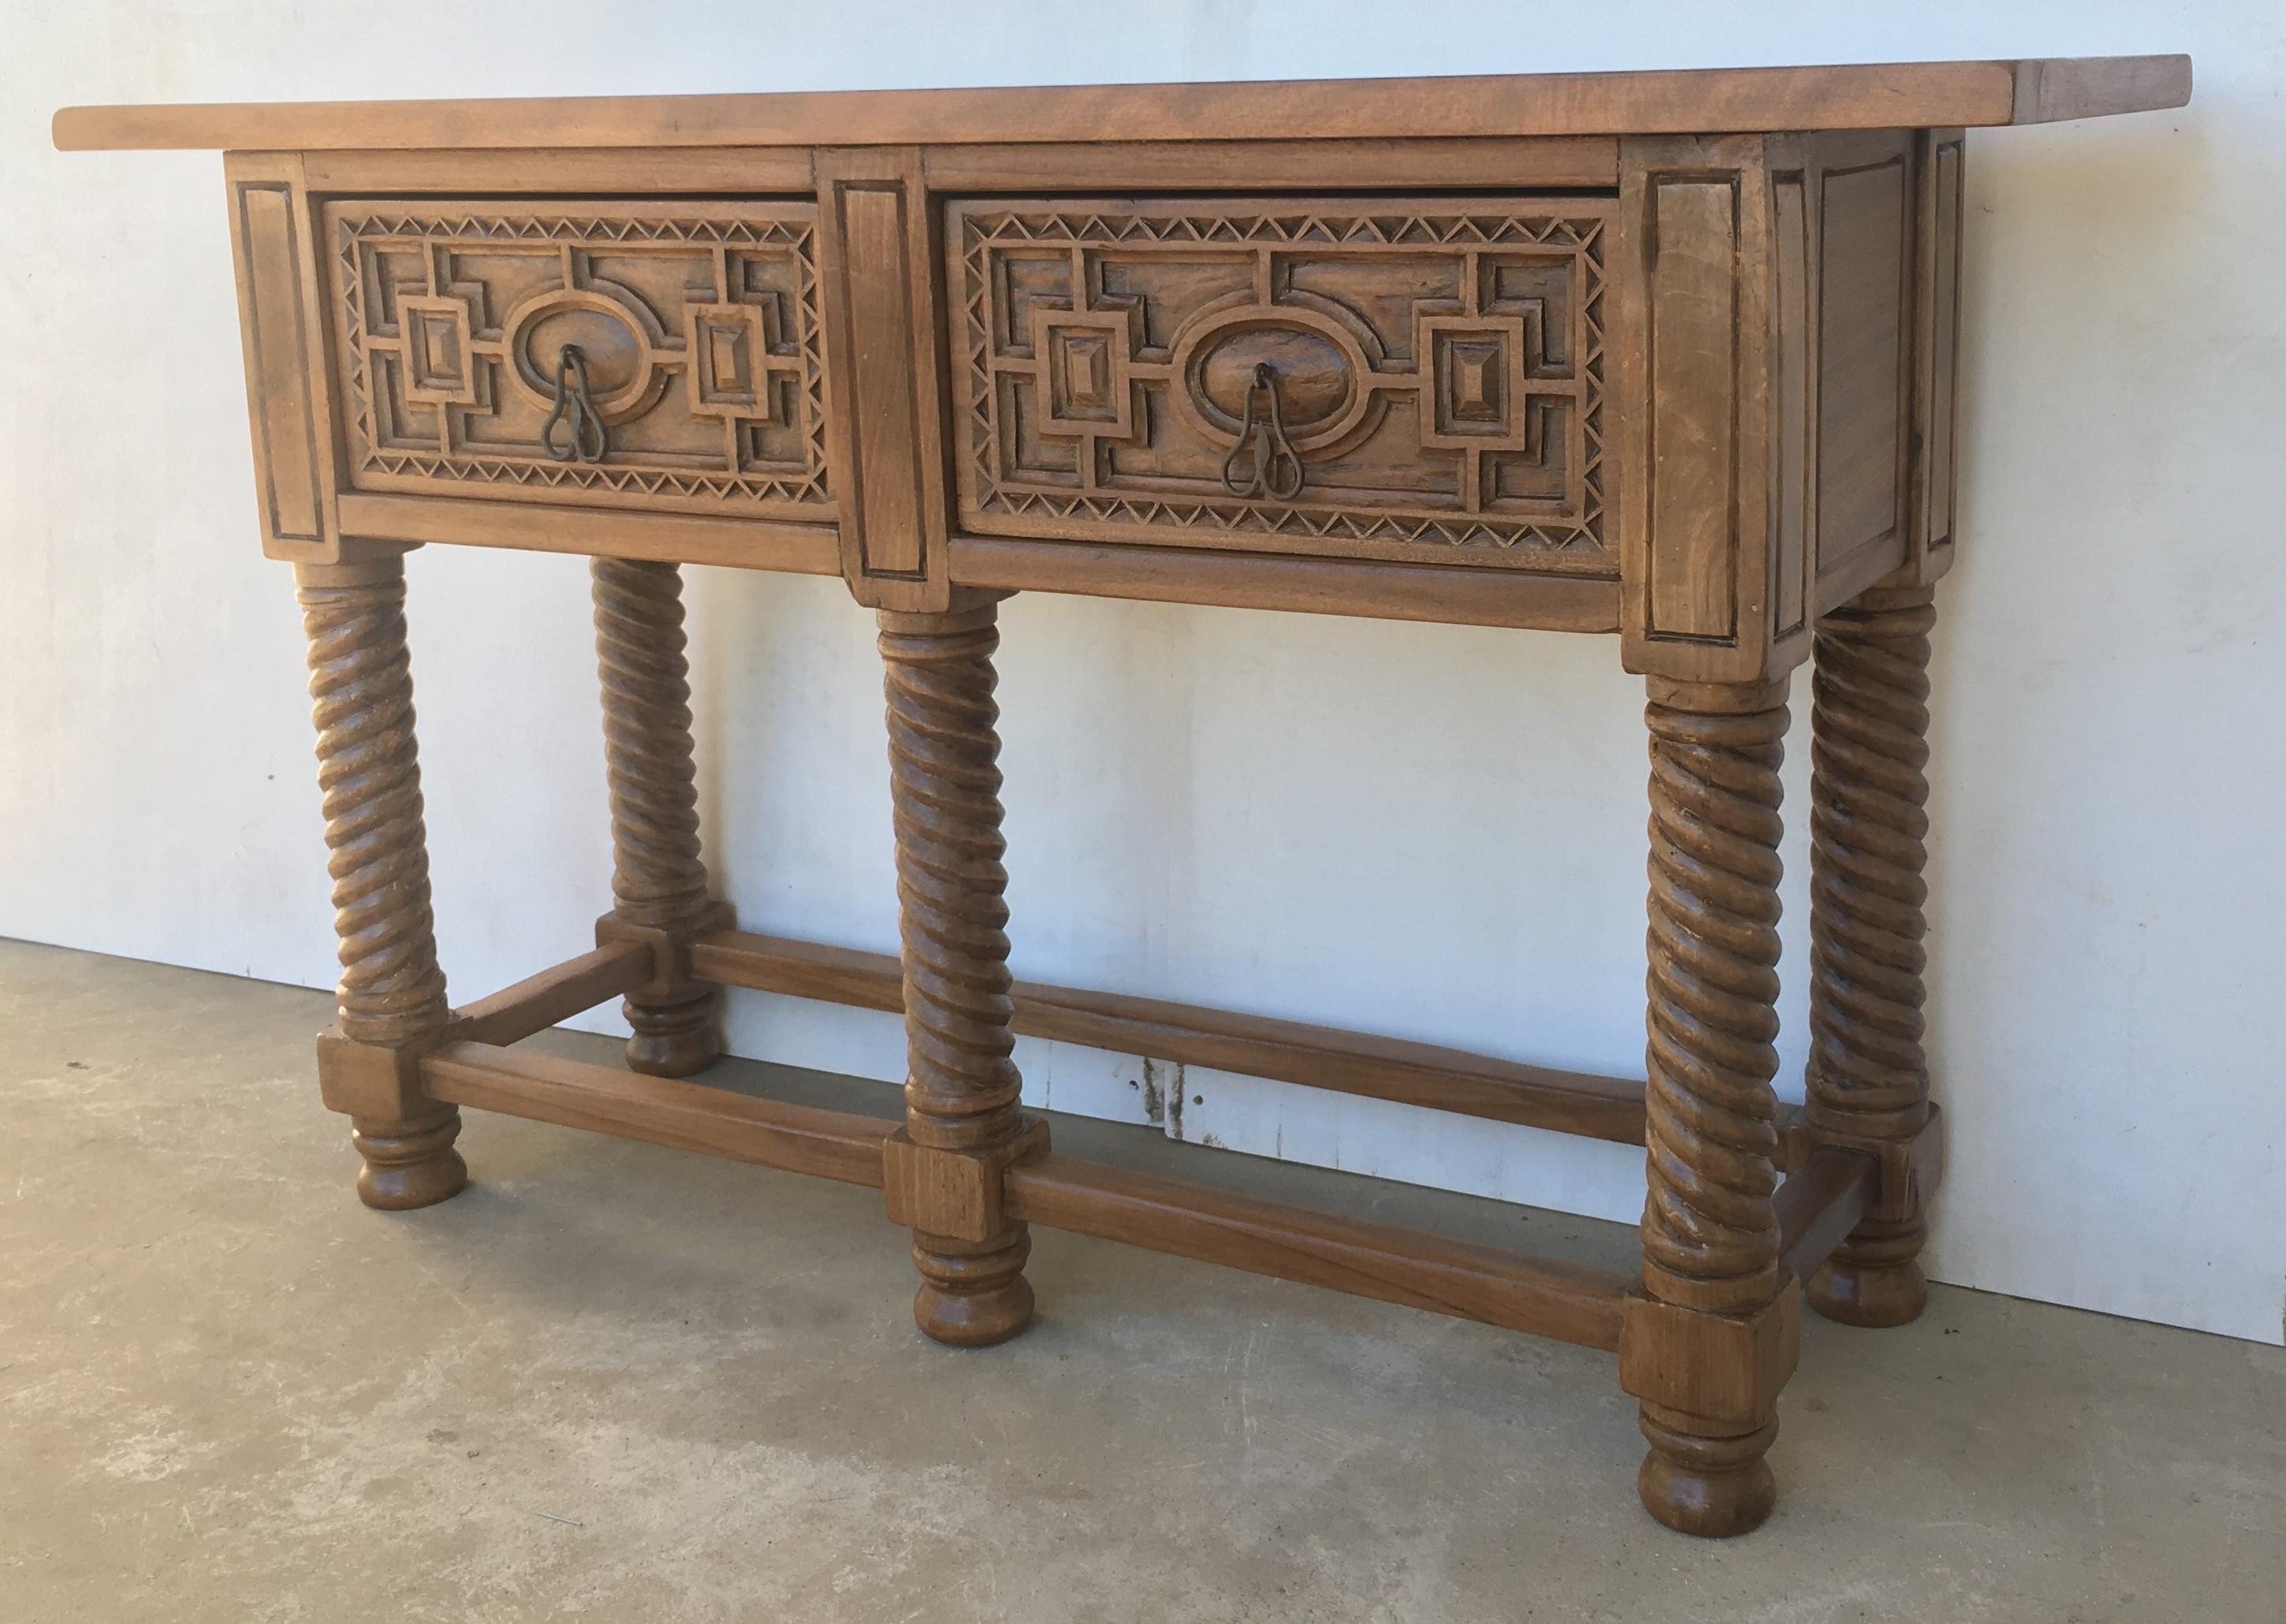 Early 19th Century Carved Walnut Wood Catalan Spanish Console Table (Barock)